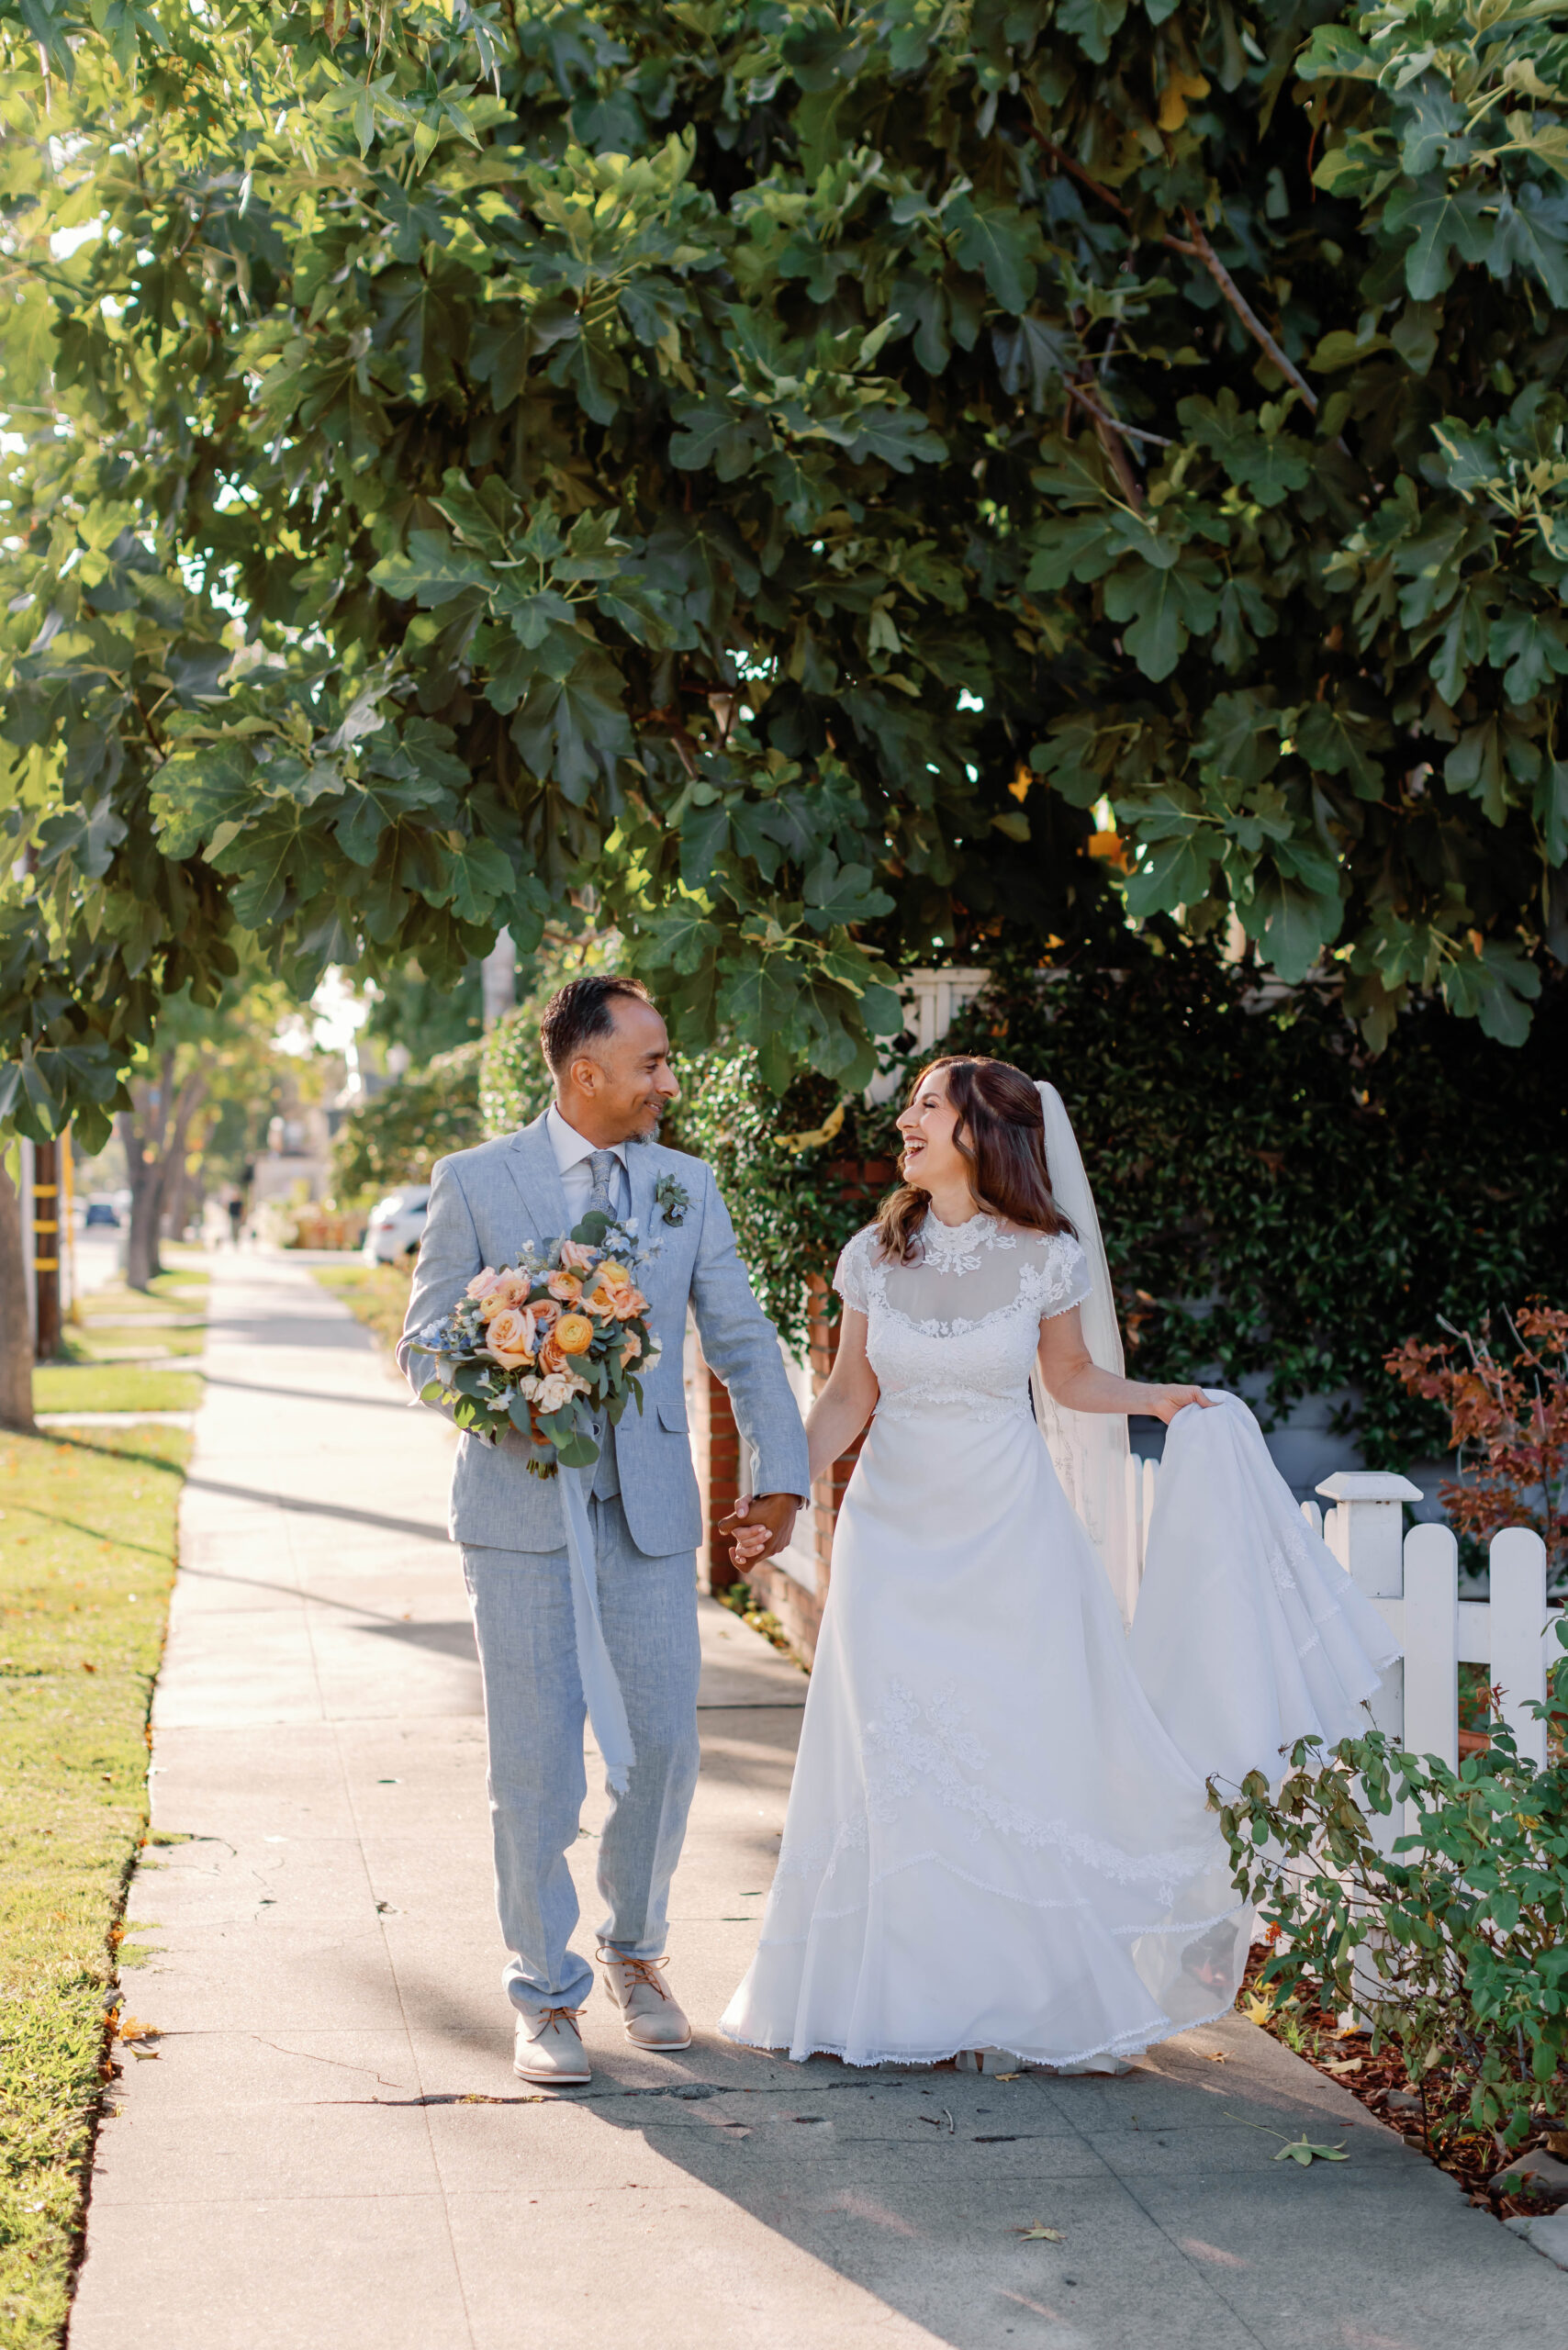 Bride and groom walking hand in in hand | Photo by Sarah Block Photography